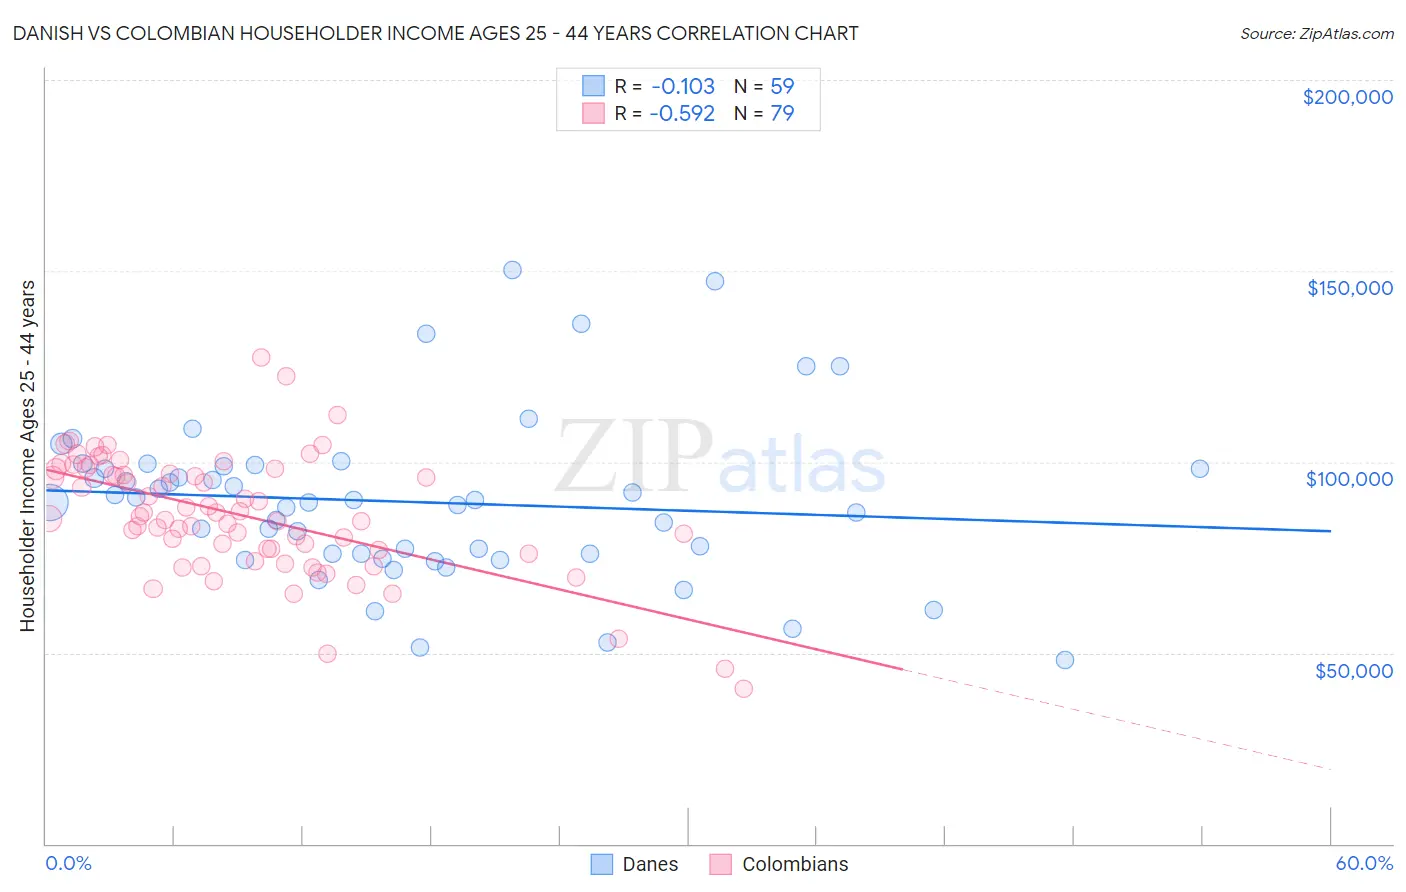 Danish vs Colombian Householder Income Ages 25 - 44 years